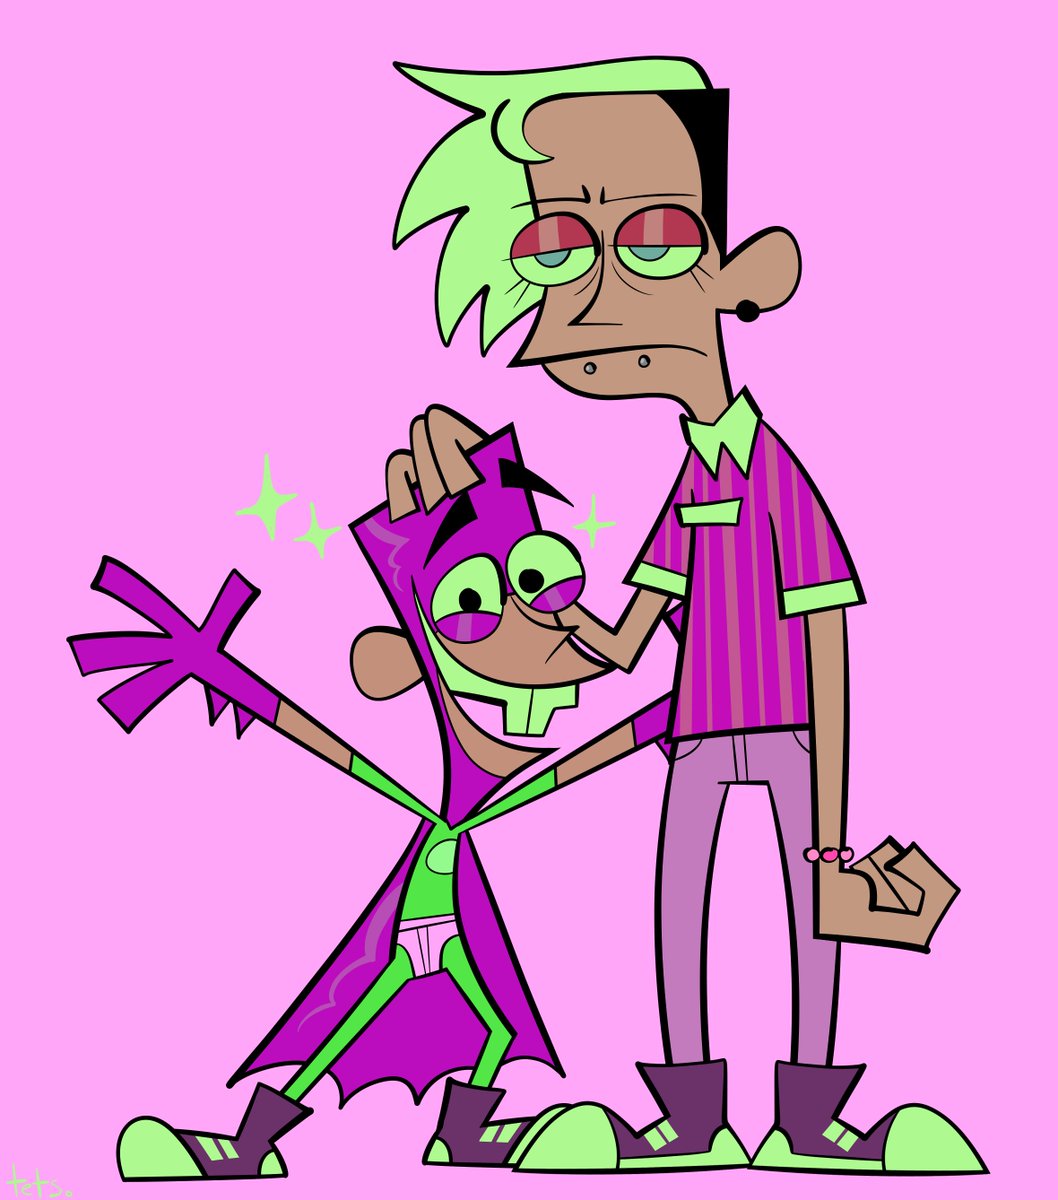 69. remember my fanboy and chum chum self insert who was also fanboys broth...